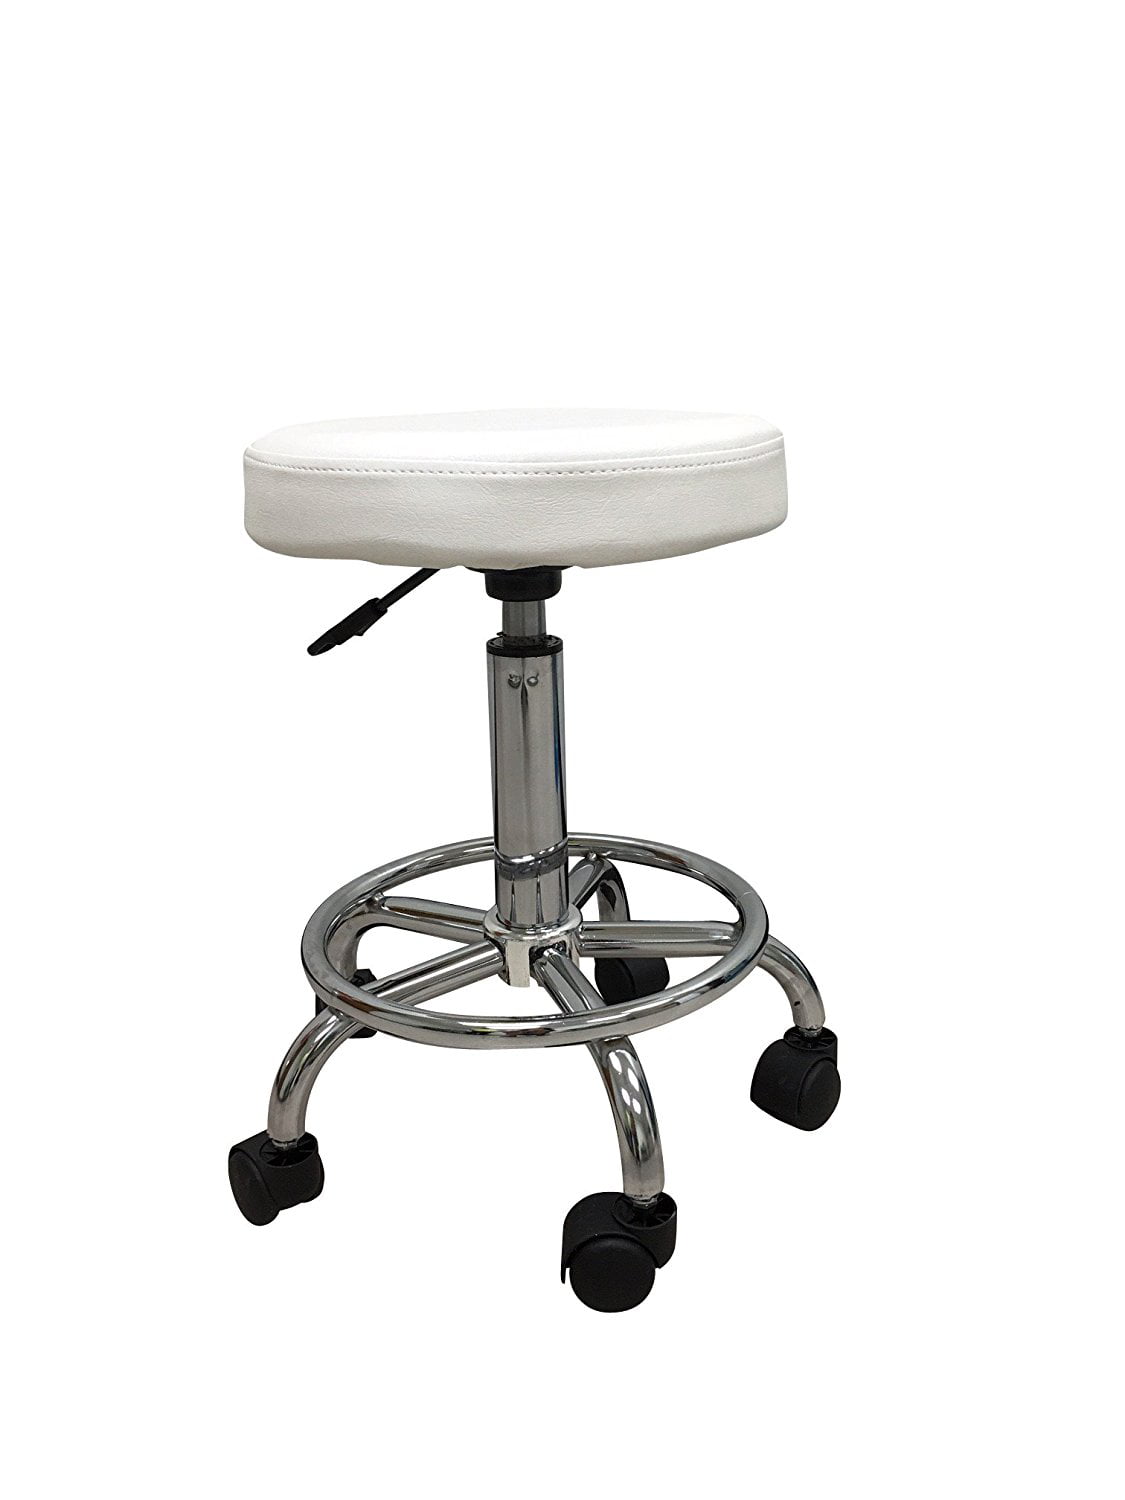 Massage Stools on Wheels Hydraulic Gas Lift Stool Adjustable Swivel Stool for Salon Beauty Barber Office Manicure Work Stools Chair Soft Cushion Seat Million Star Round Rolling Stool Chair White